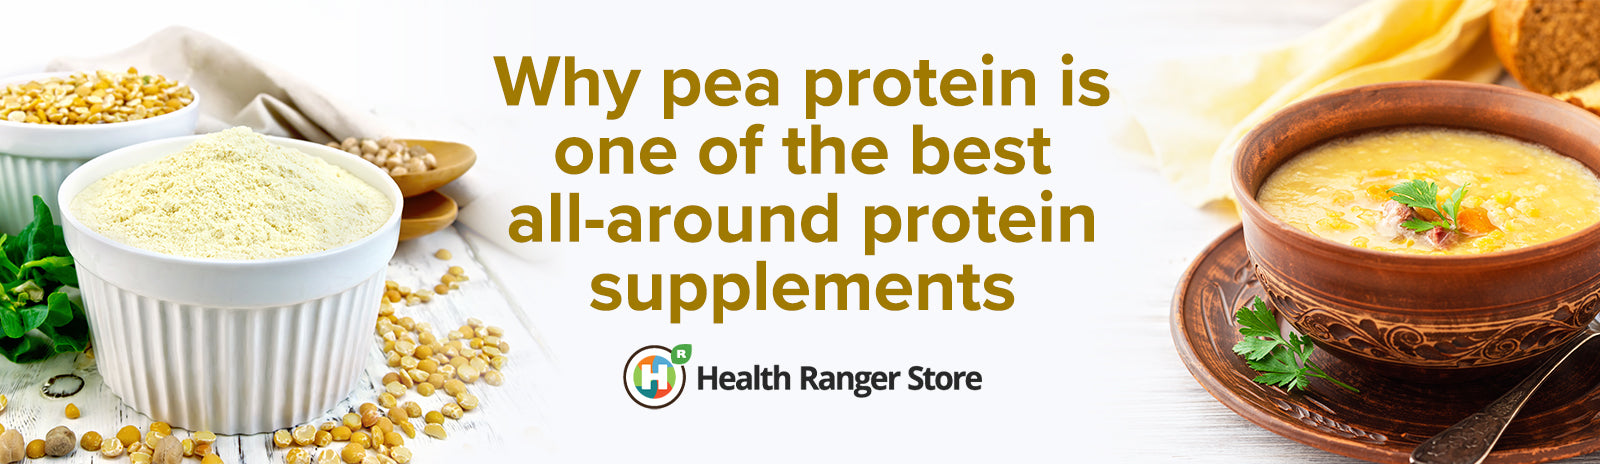 Why pea protein is one of the best all-around protein supplements